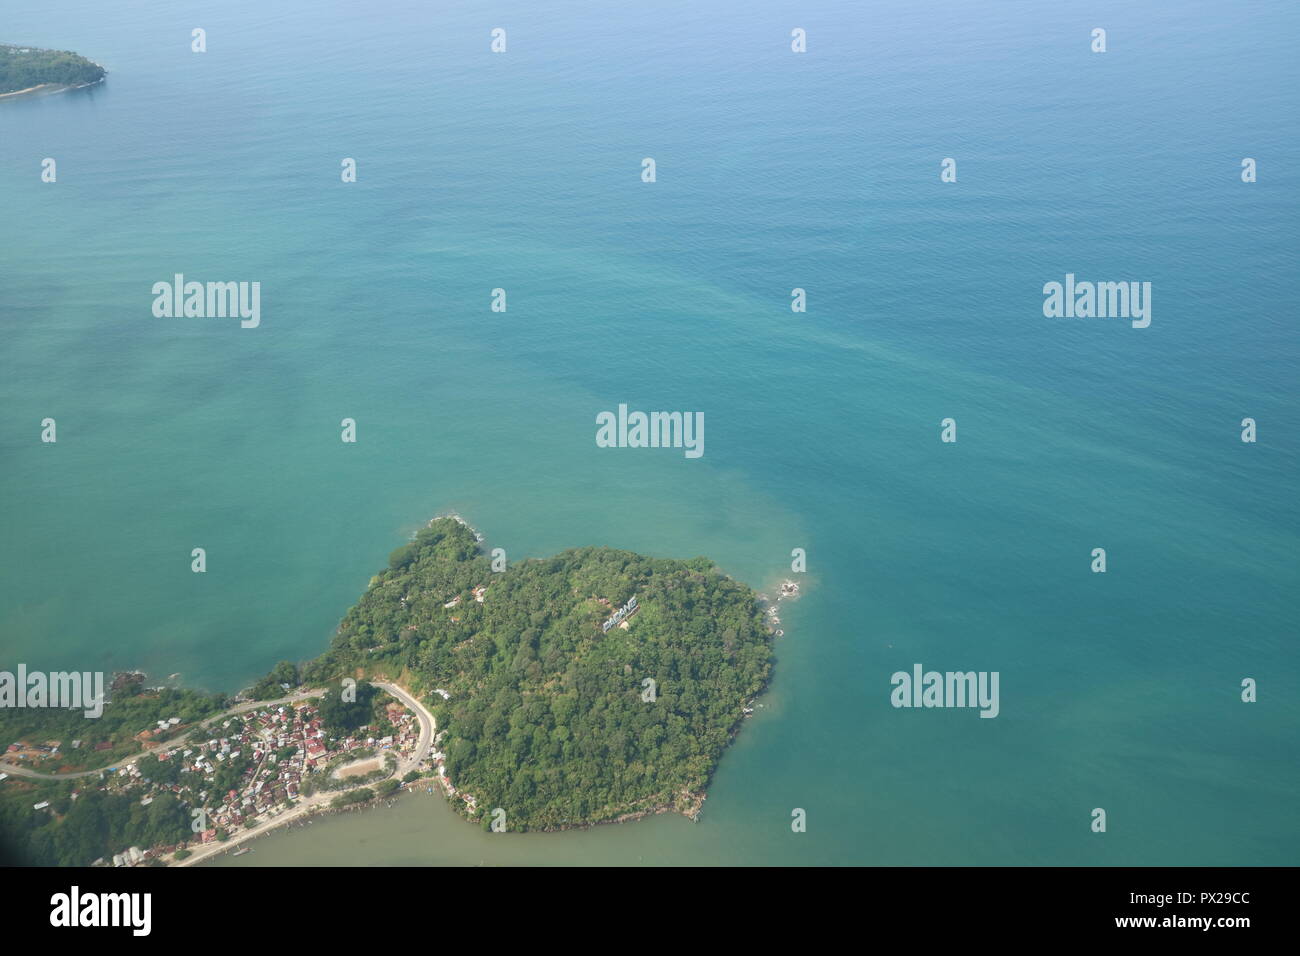 aerial view from Padang, West Sumatra, Indonesia Stock Photo